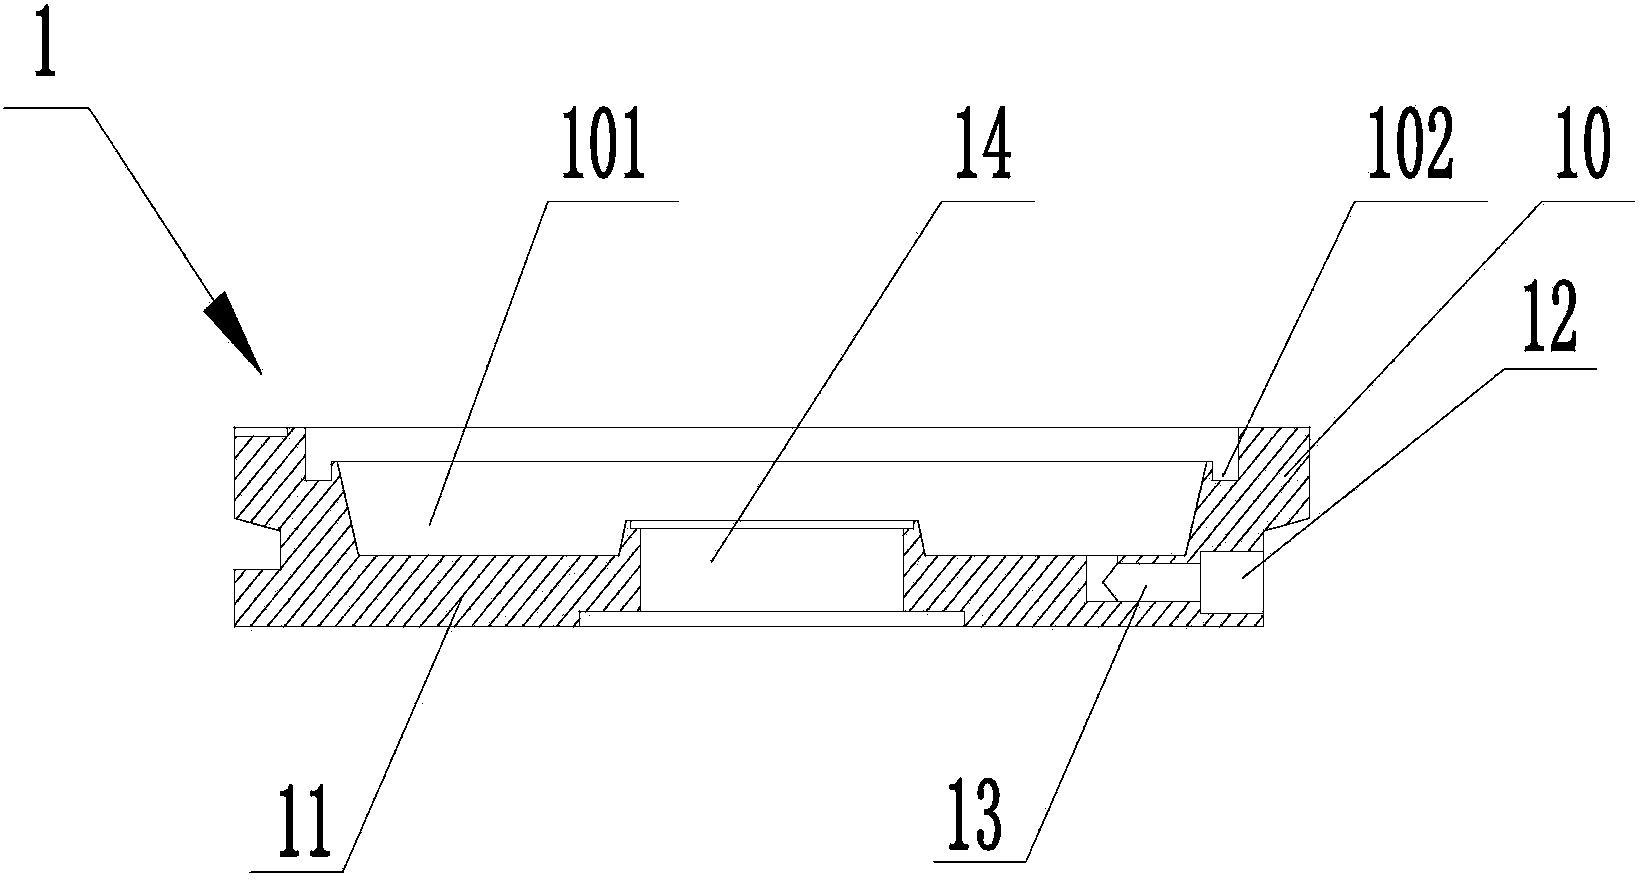 A method and pouring device for sealing the end of a column membrane module